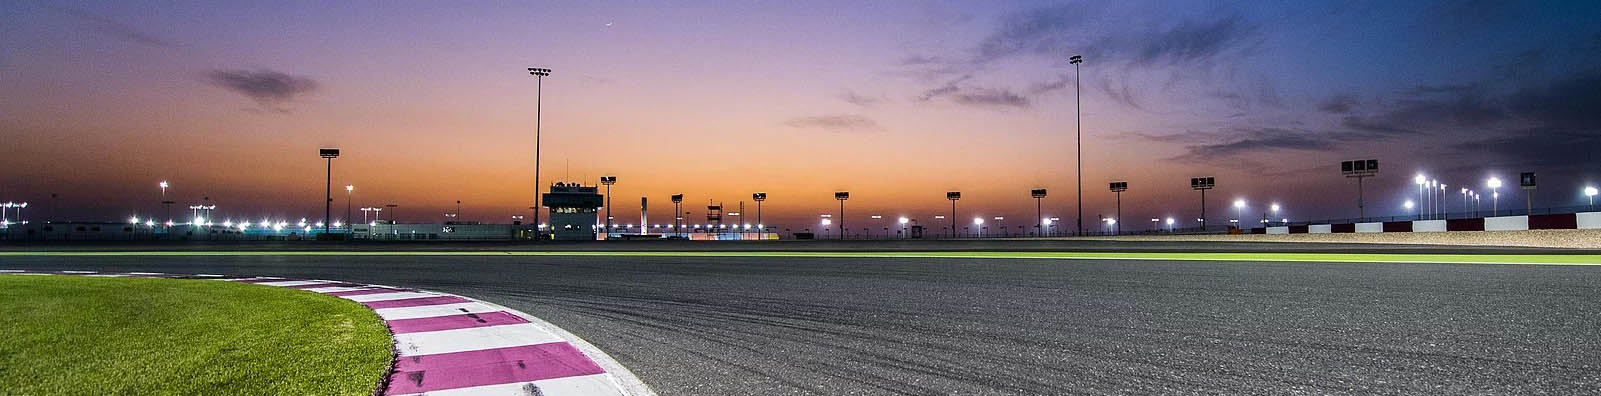 Lights Go Green for the Grand Prix of Qatar